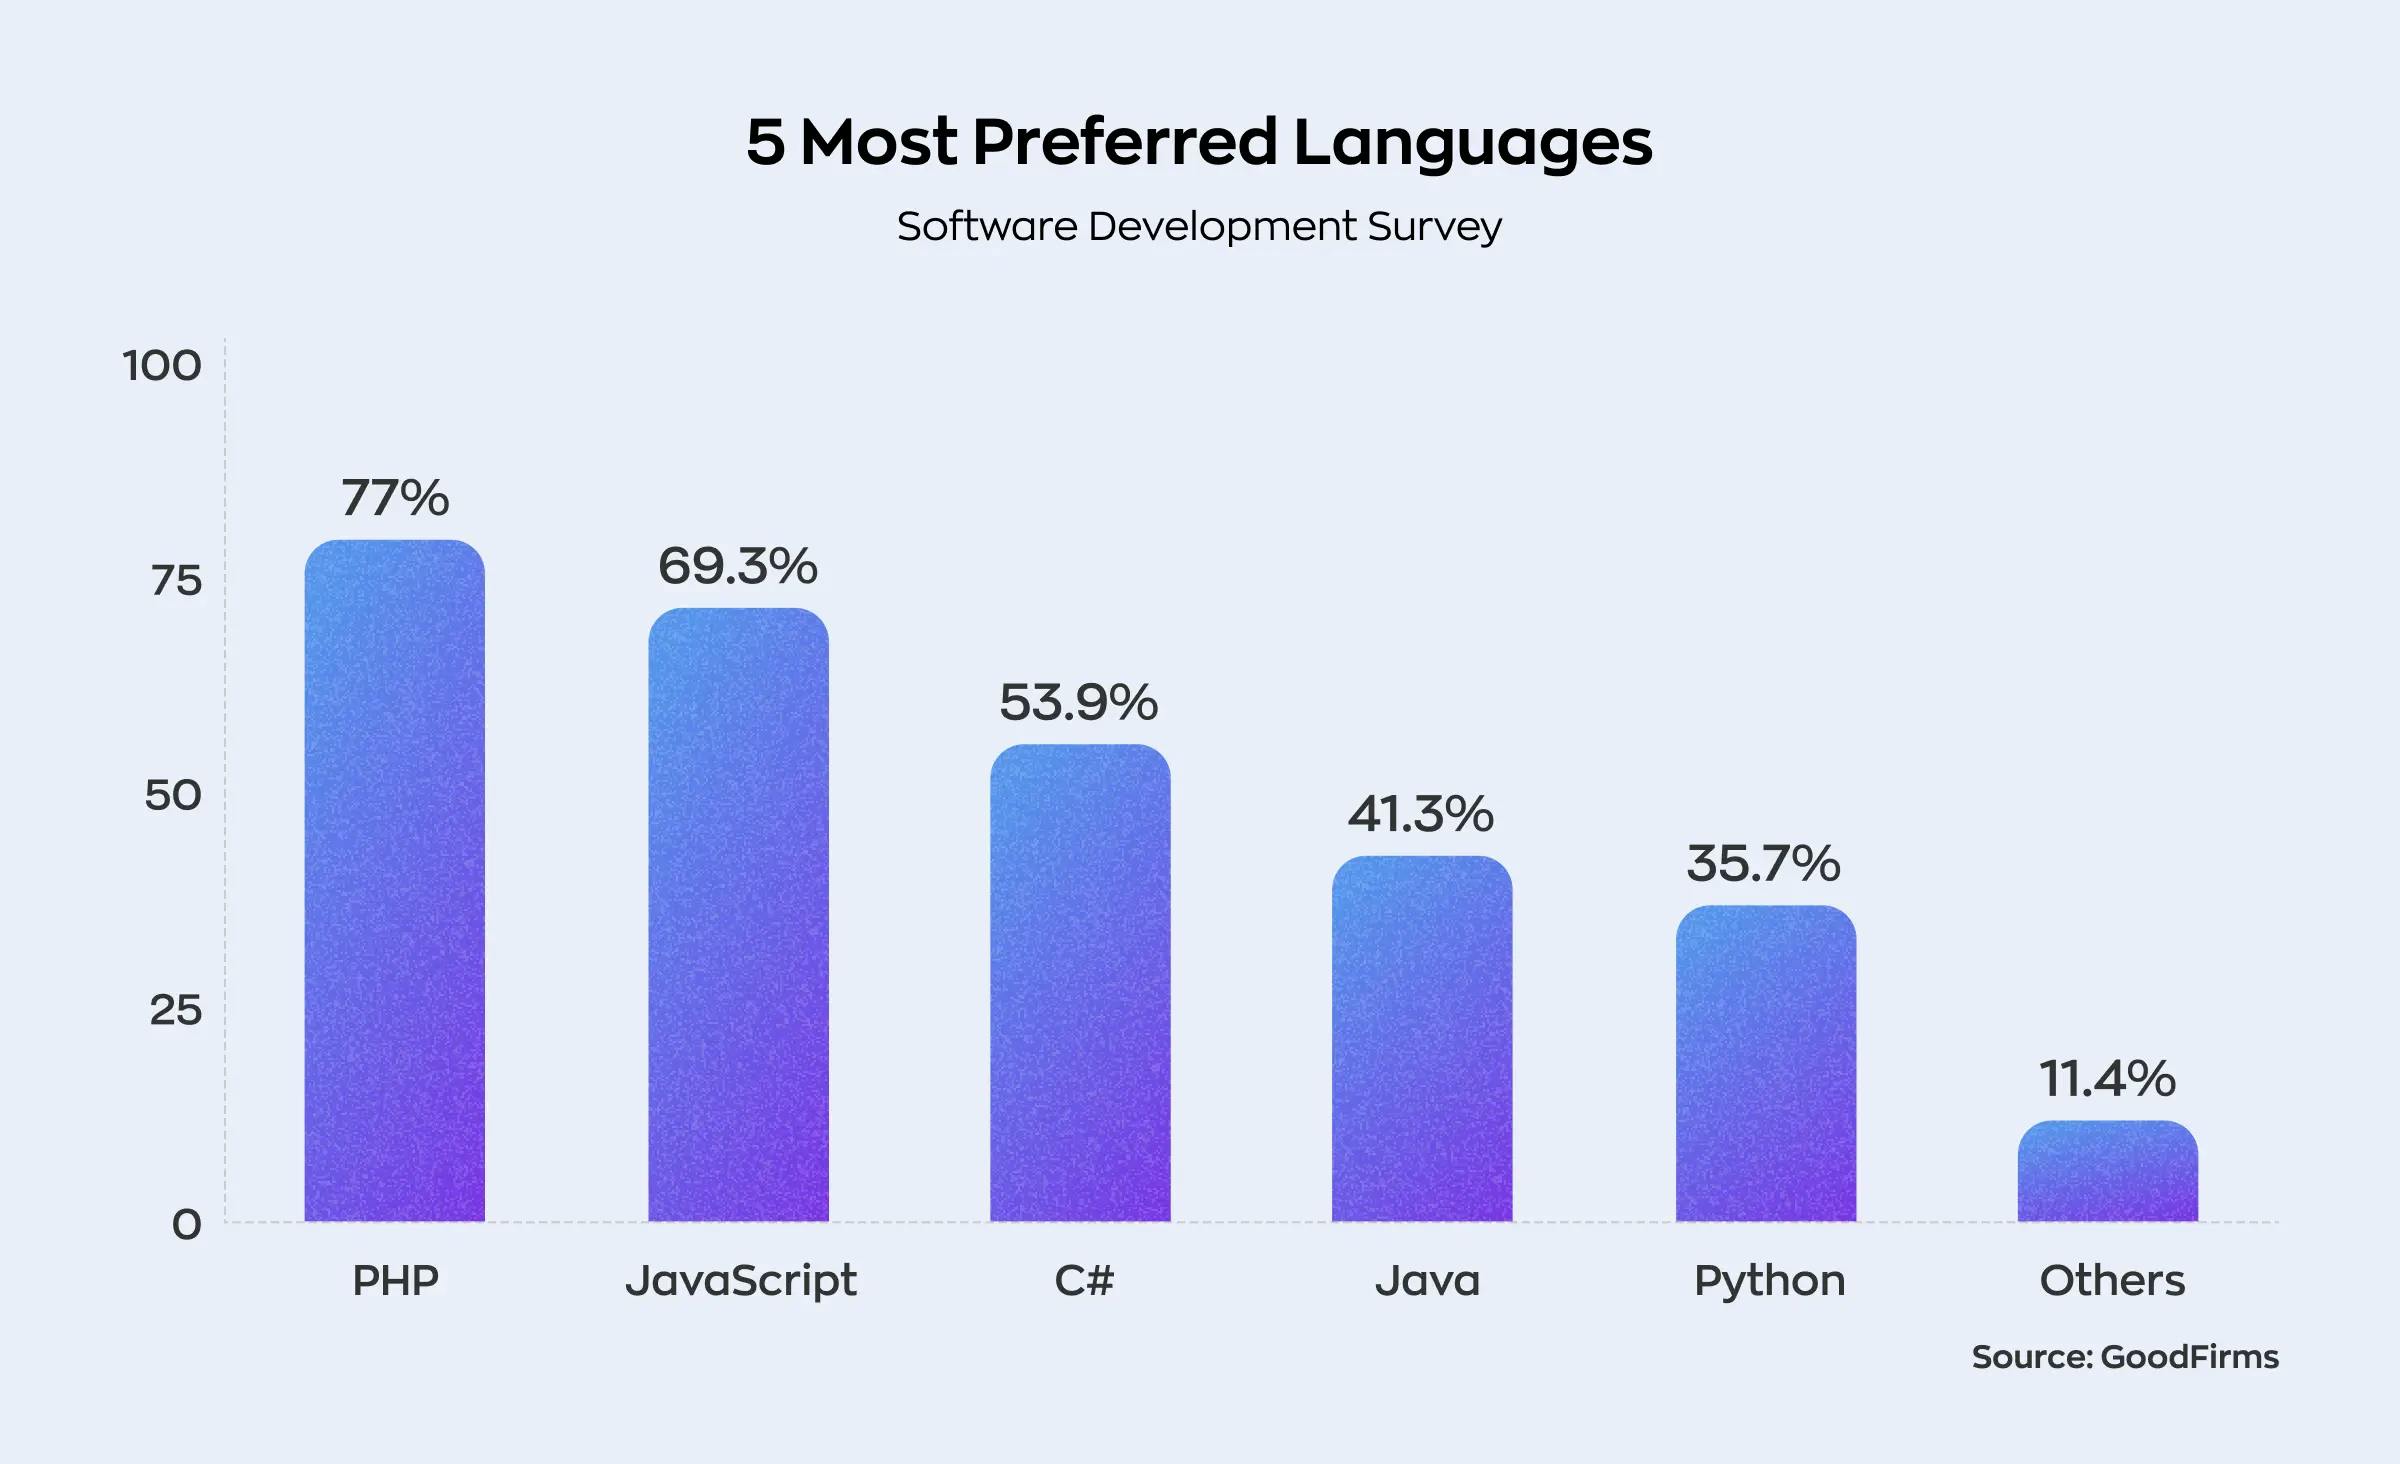 The image presents statistics on the most popular programming languages of 2023, according to data from GoodFirms. PHP language is preferred by 77% of developers, which is also used in entertainment software development. JavaScript is preferred by 69.3% of developers, 53.9% opt for #C, 41.3% prefer Java, 35.7% favor Python, and 11.4% prefer other languages.